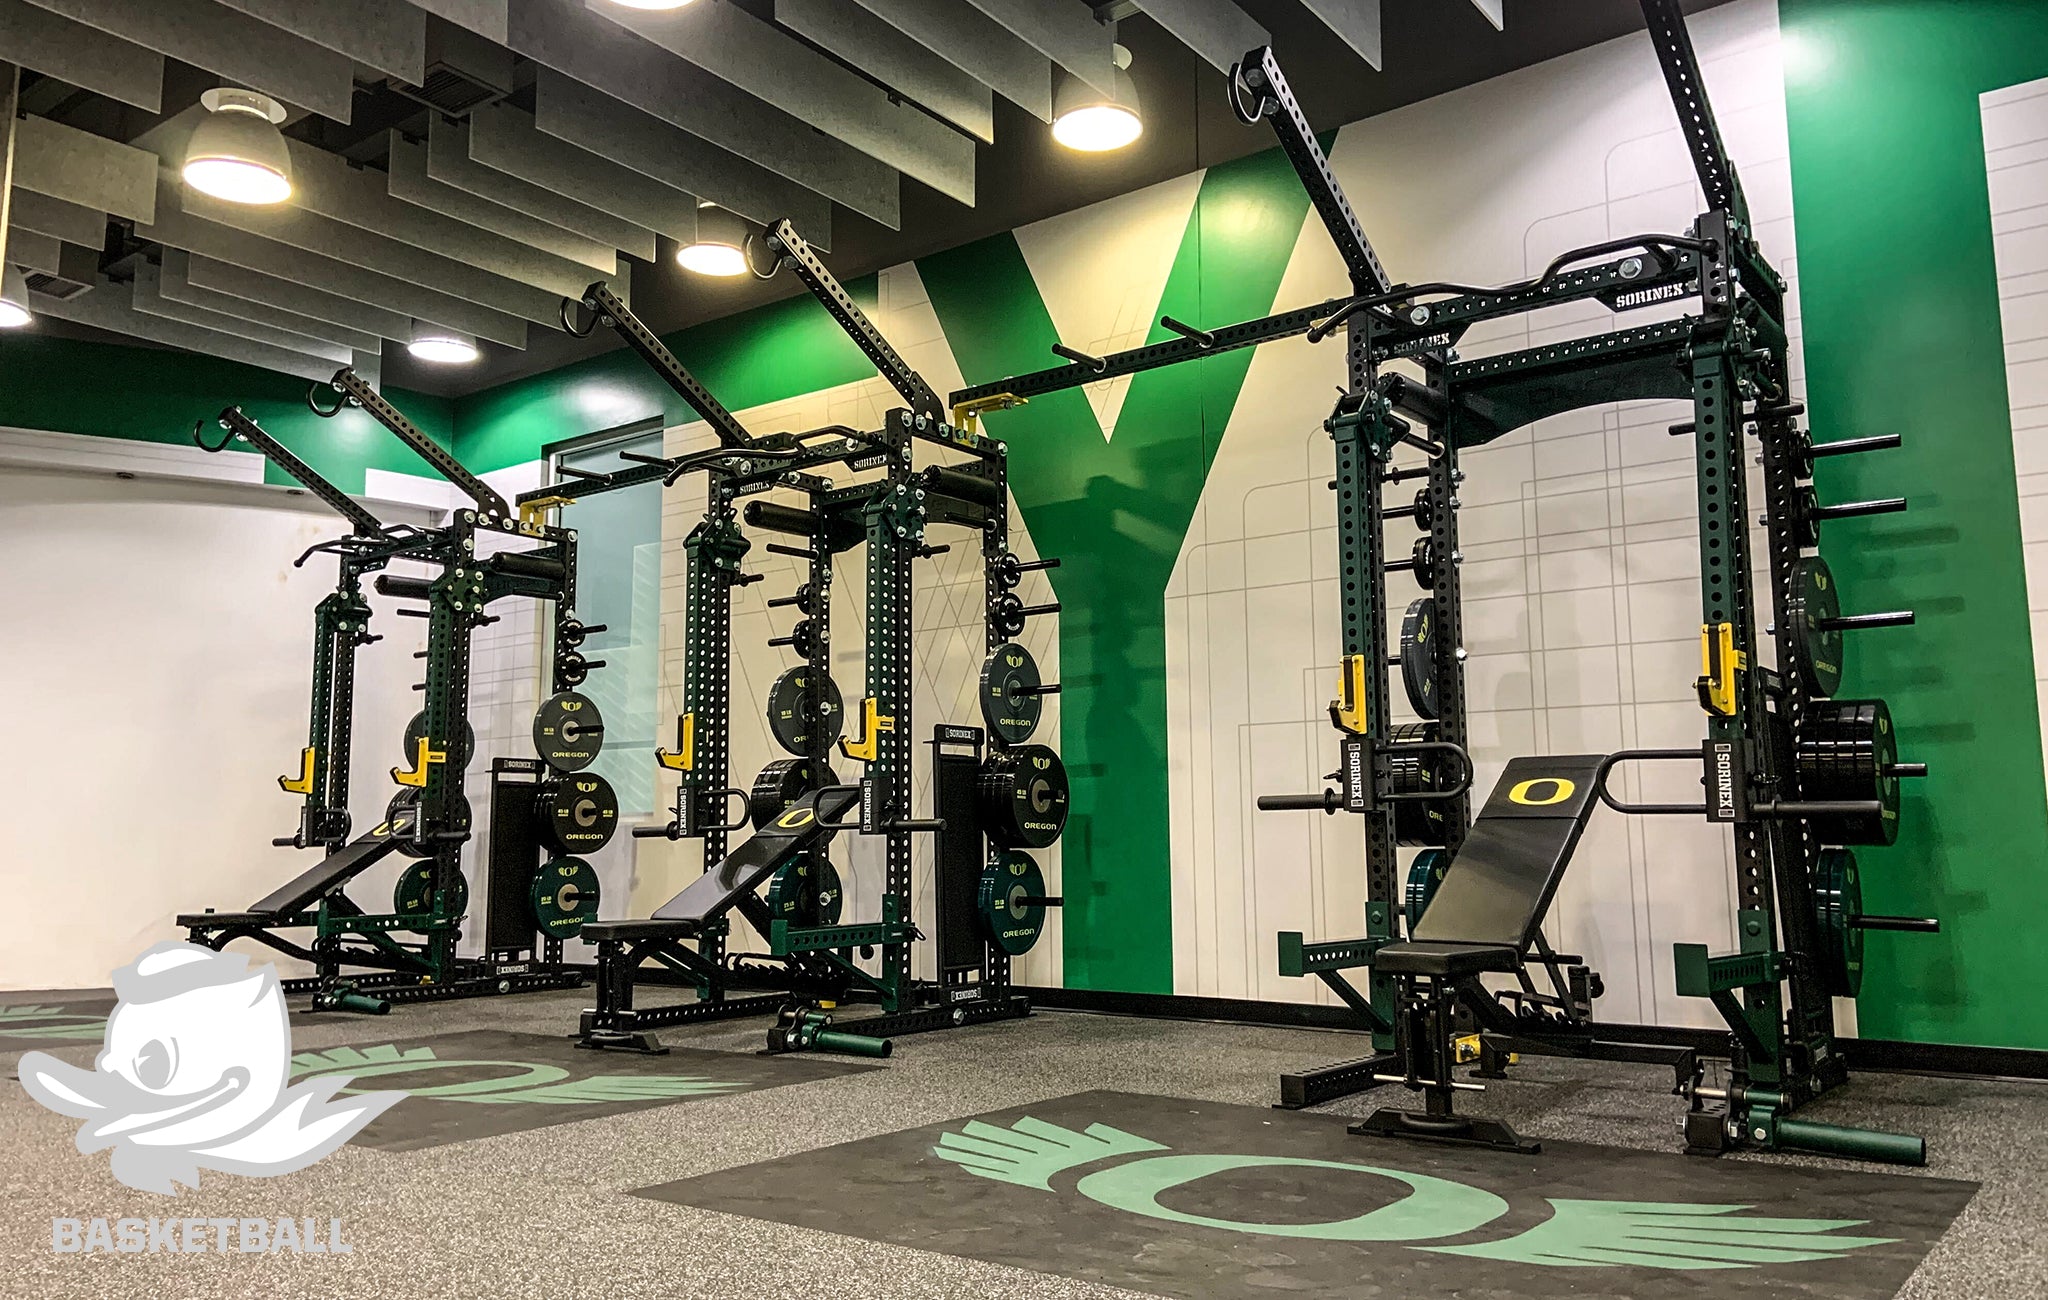 University of Oregon Sorinex strength and conditioning facility